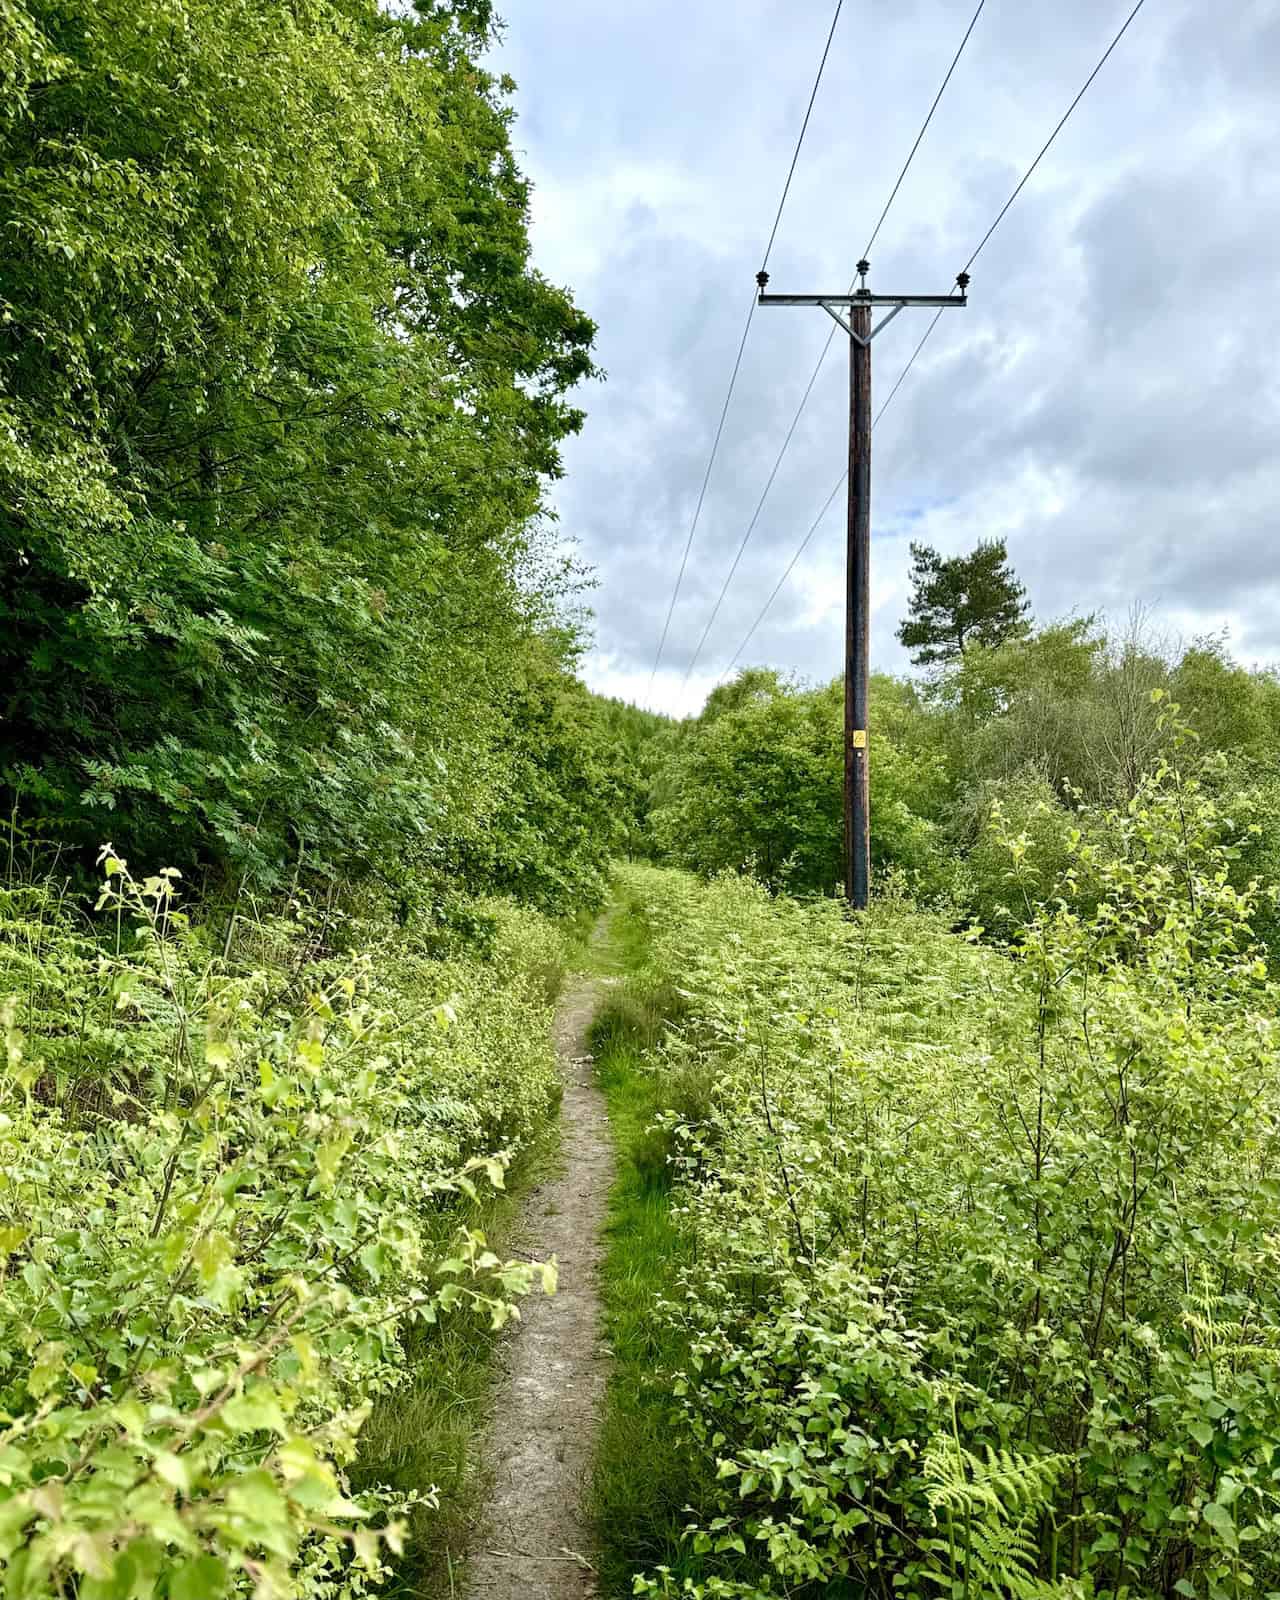 Narrow path following telegraph poles on the way to Dale End Bridge, with dense vegetation hiding the River Dove.
